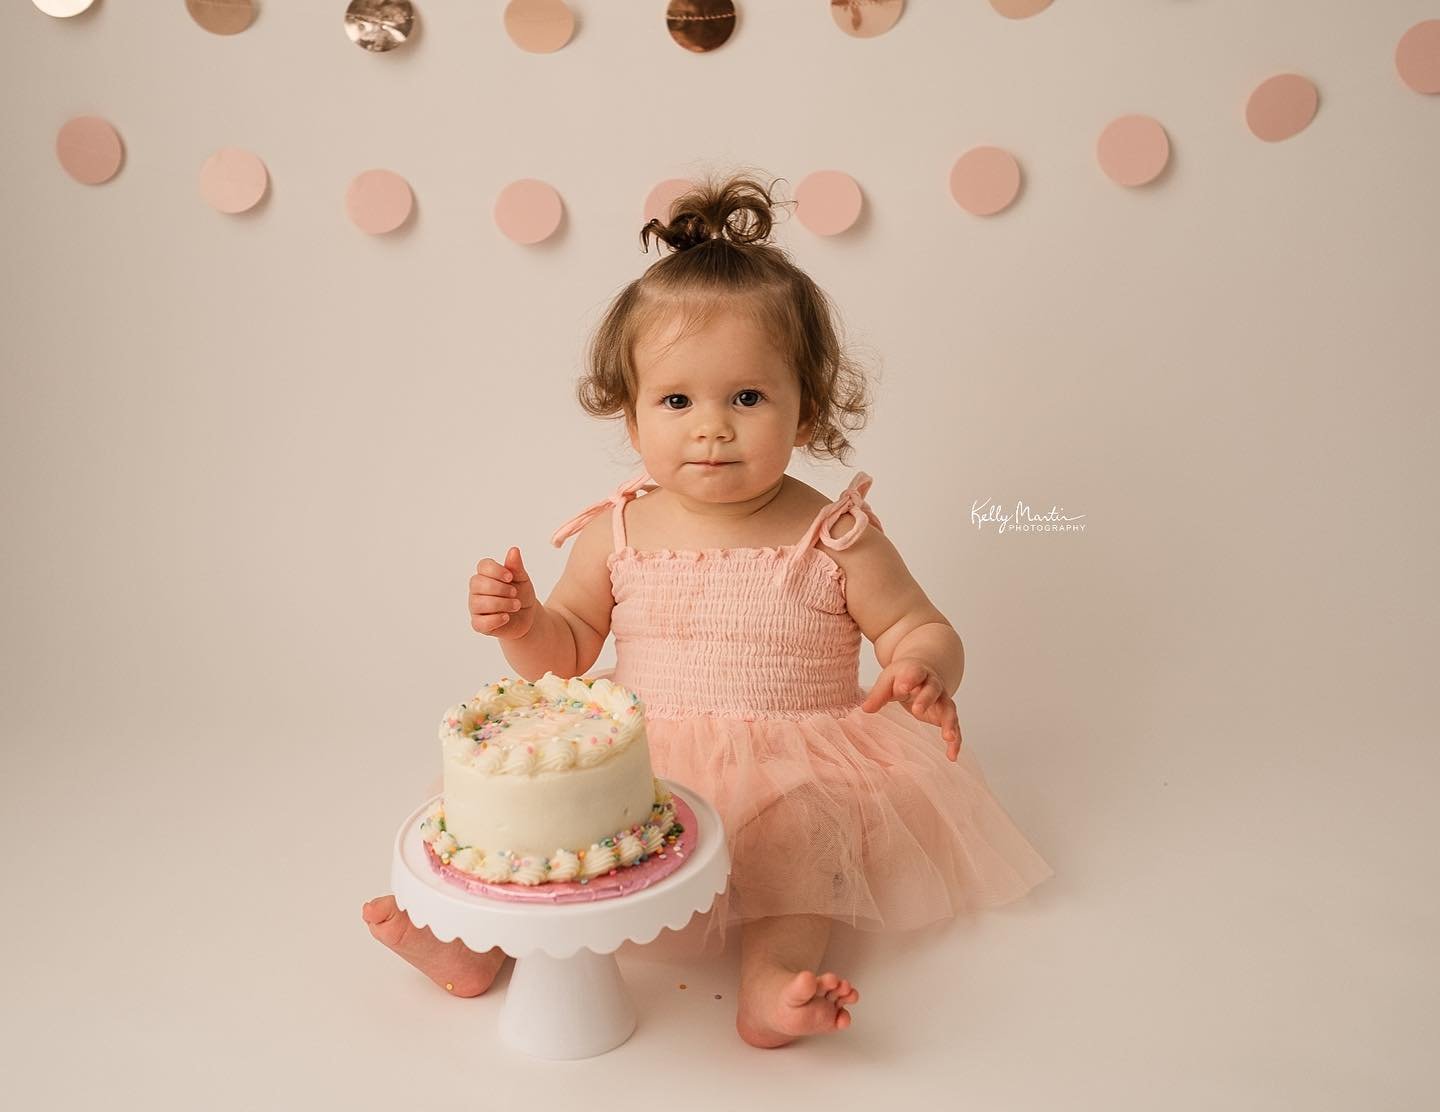 Record setting cake smash #4 with me for the Karvasky&rsquo;s 😍 #kellymartinphotography #indianapolisfamilyphotographer #zionsvillefamilyphotographer #zionsvillephotographystudio #cakesmashphotography